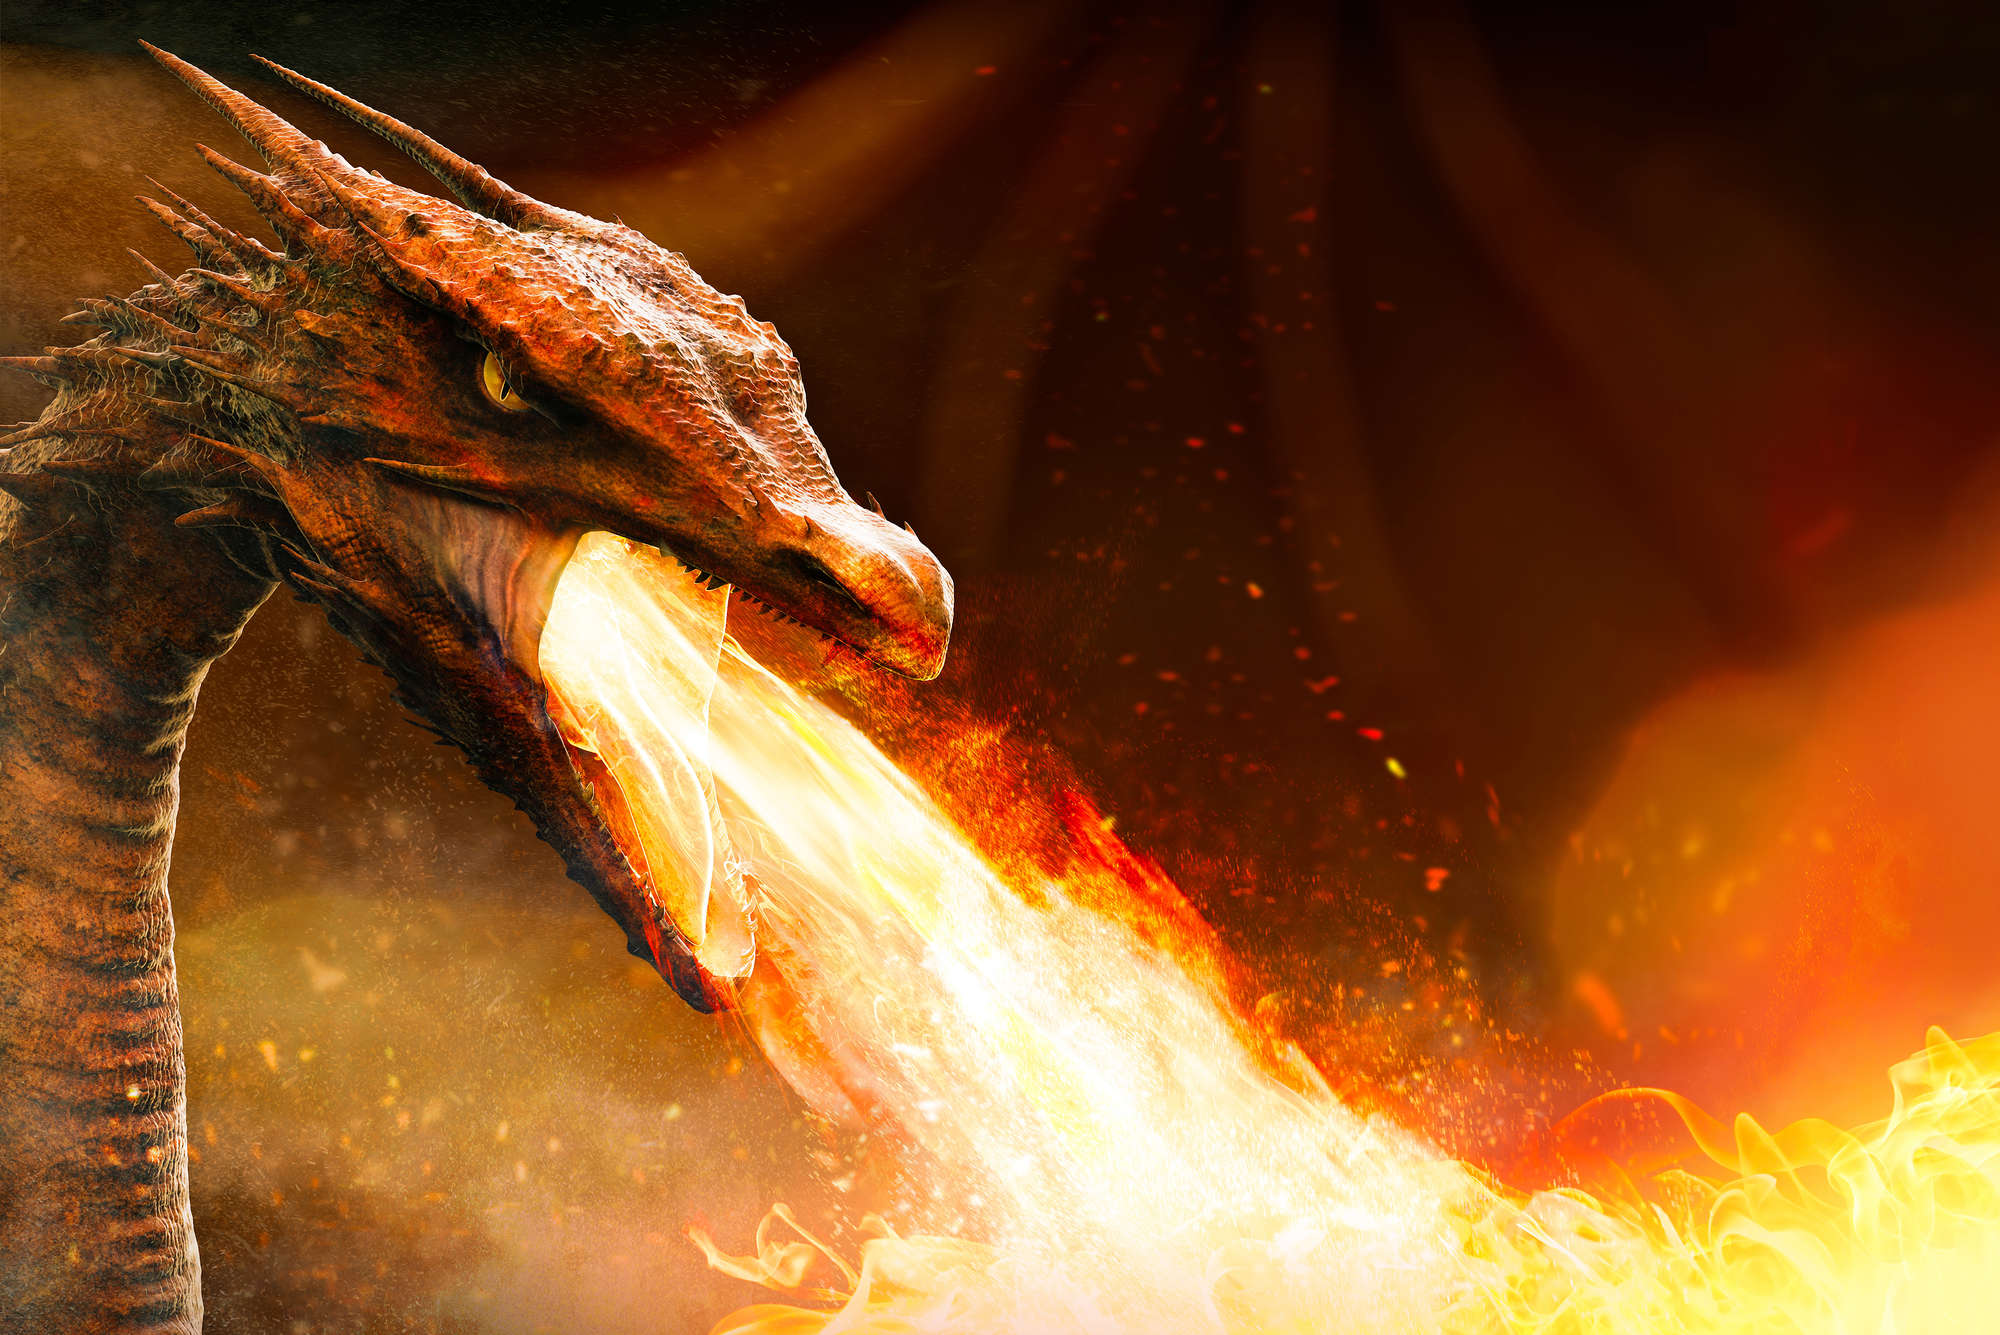             Fantasy mural fire-breathing dragon on textured non-woven
        